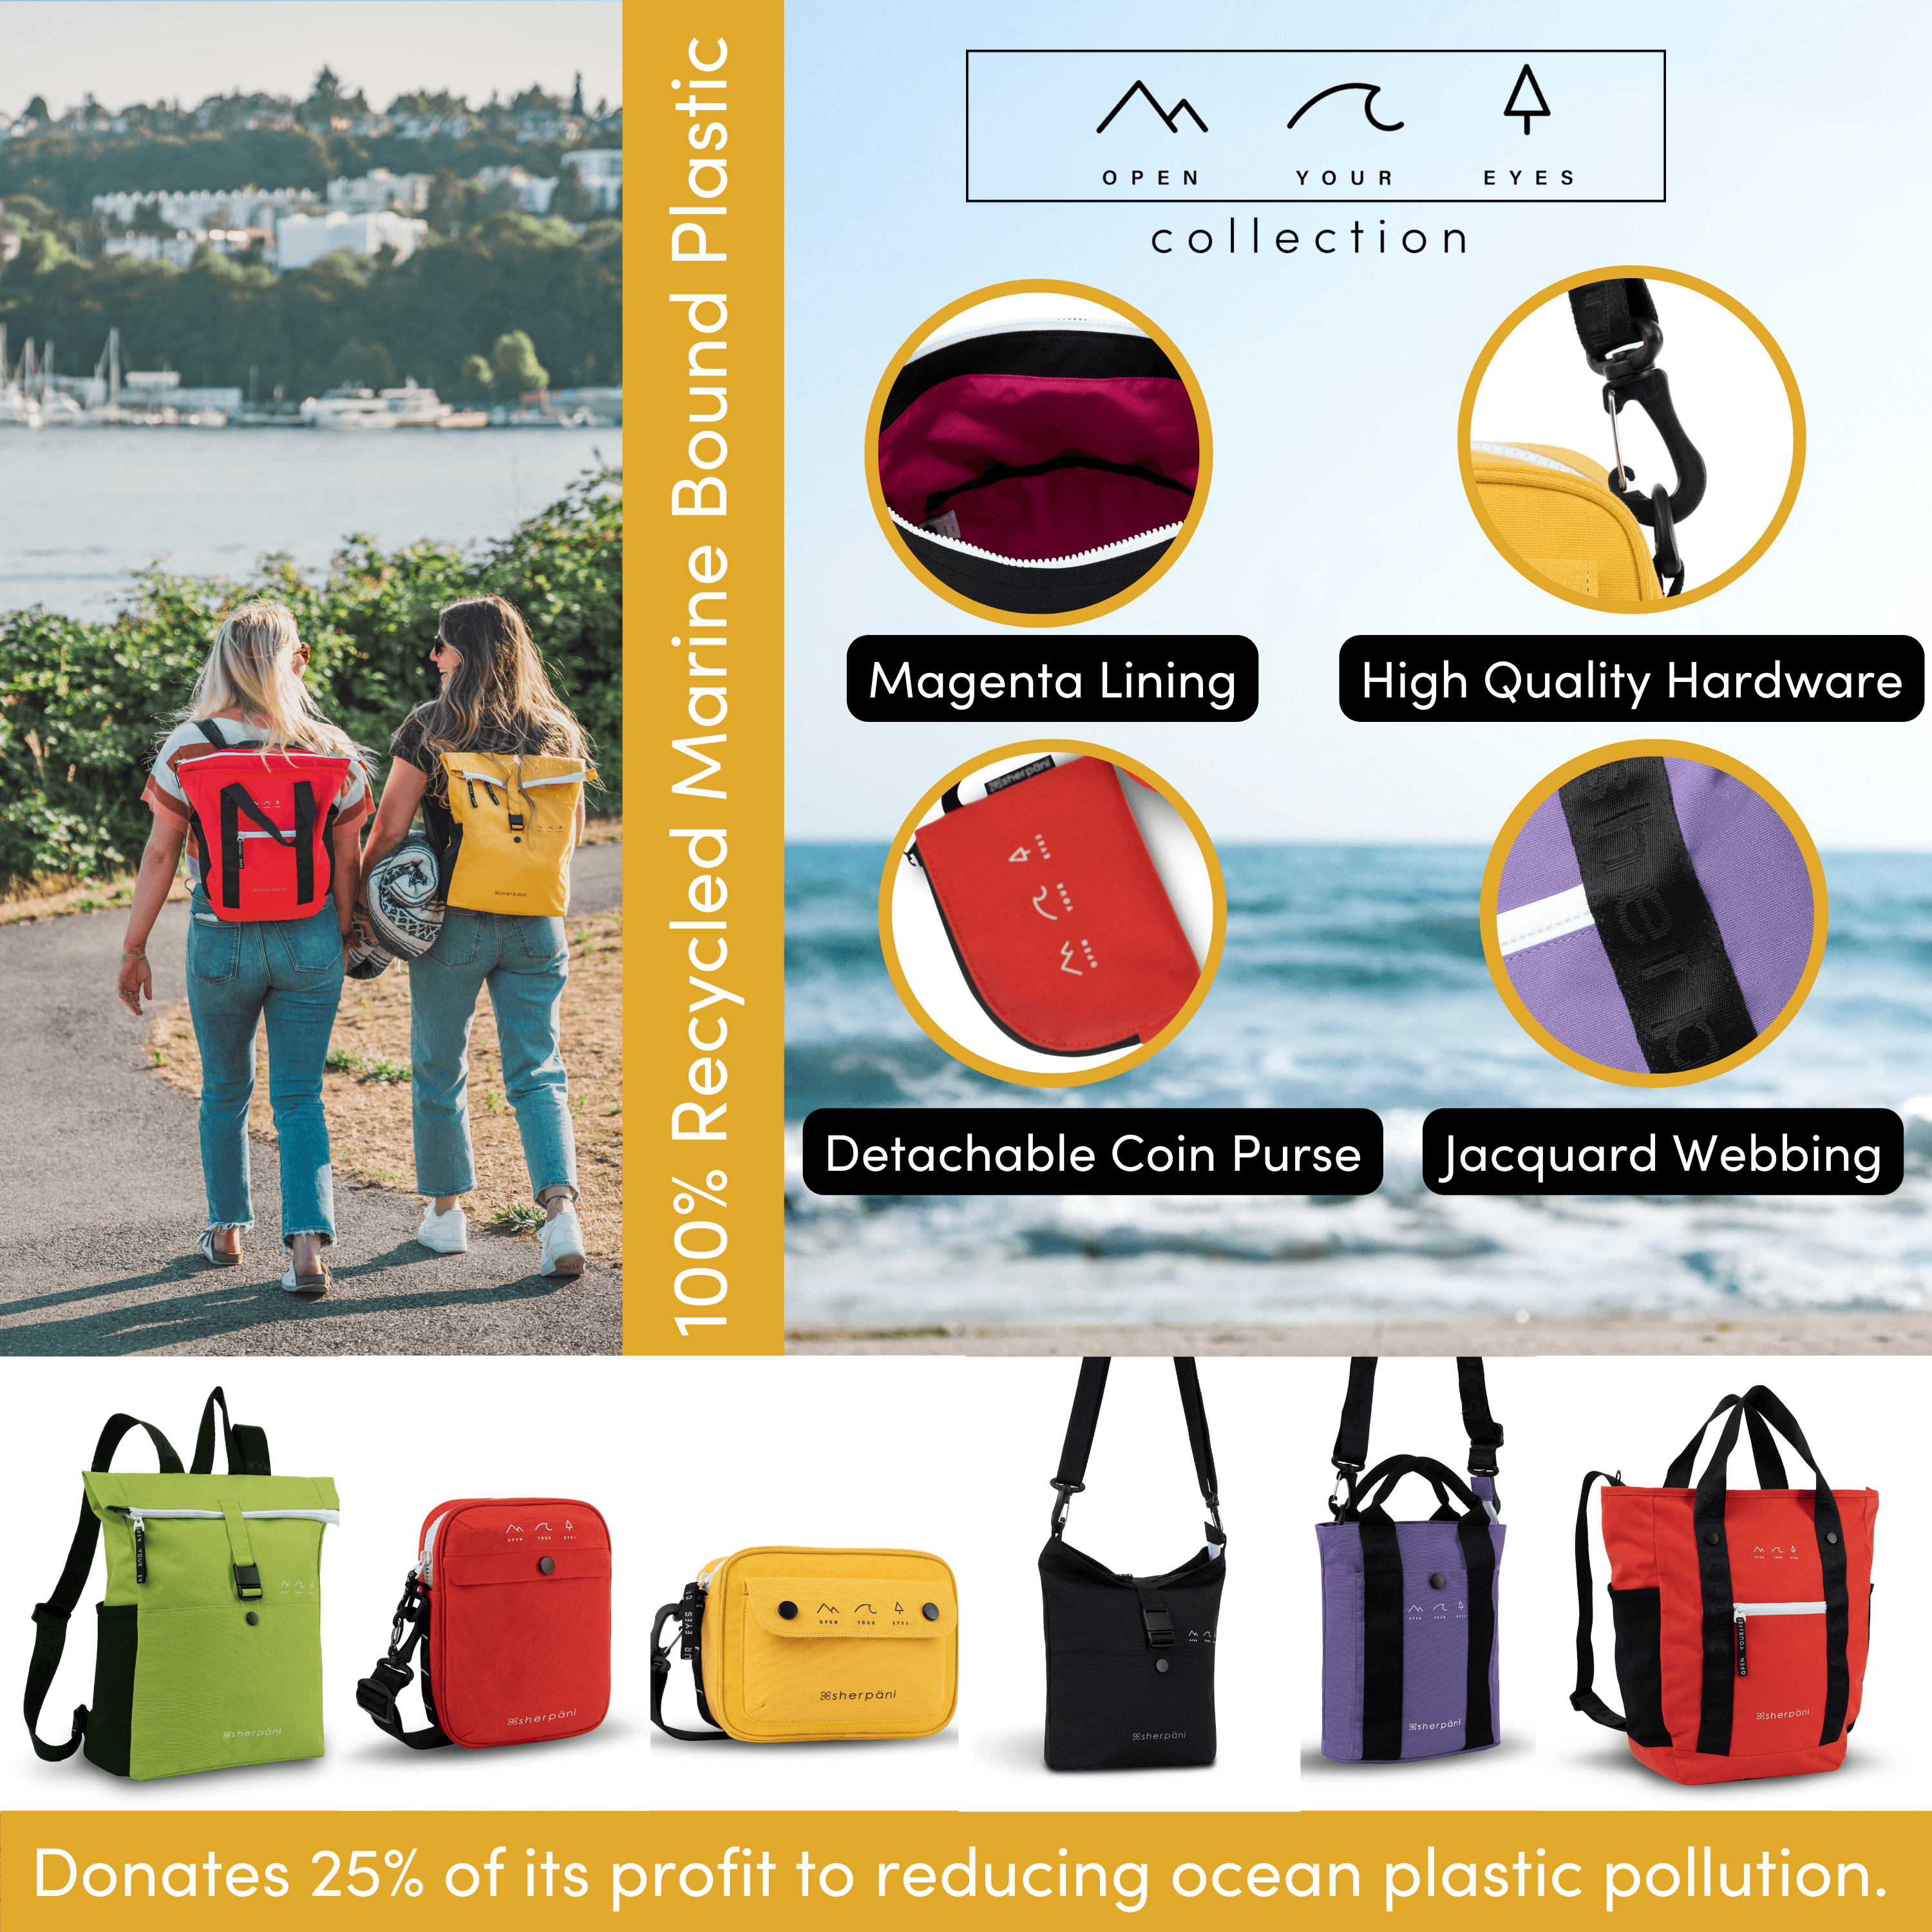 Graphic highlighting the Open Your Eyes Collection by Sherpani. There is a photo of two women walking outside wearing Sherpani bags, as well as a photo of all the bags in the collection. Text reads "100% Recycled Marine Bound Plastic" and "Donates 25% of its profit to reducing ocean plastic pollution. The following features of the collection are highlighted: Magenta Lining, High Quality Hardware, Detachable Coin Purse, Jacquard Webbing. 